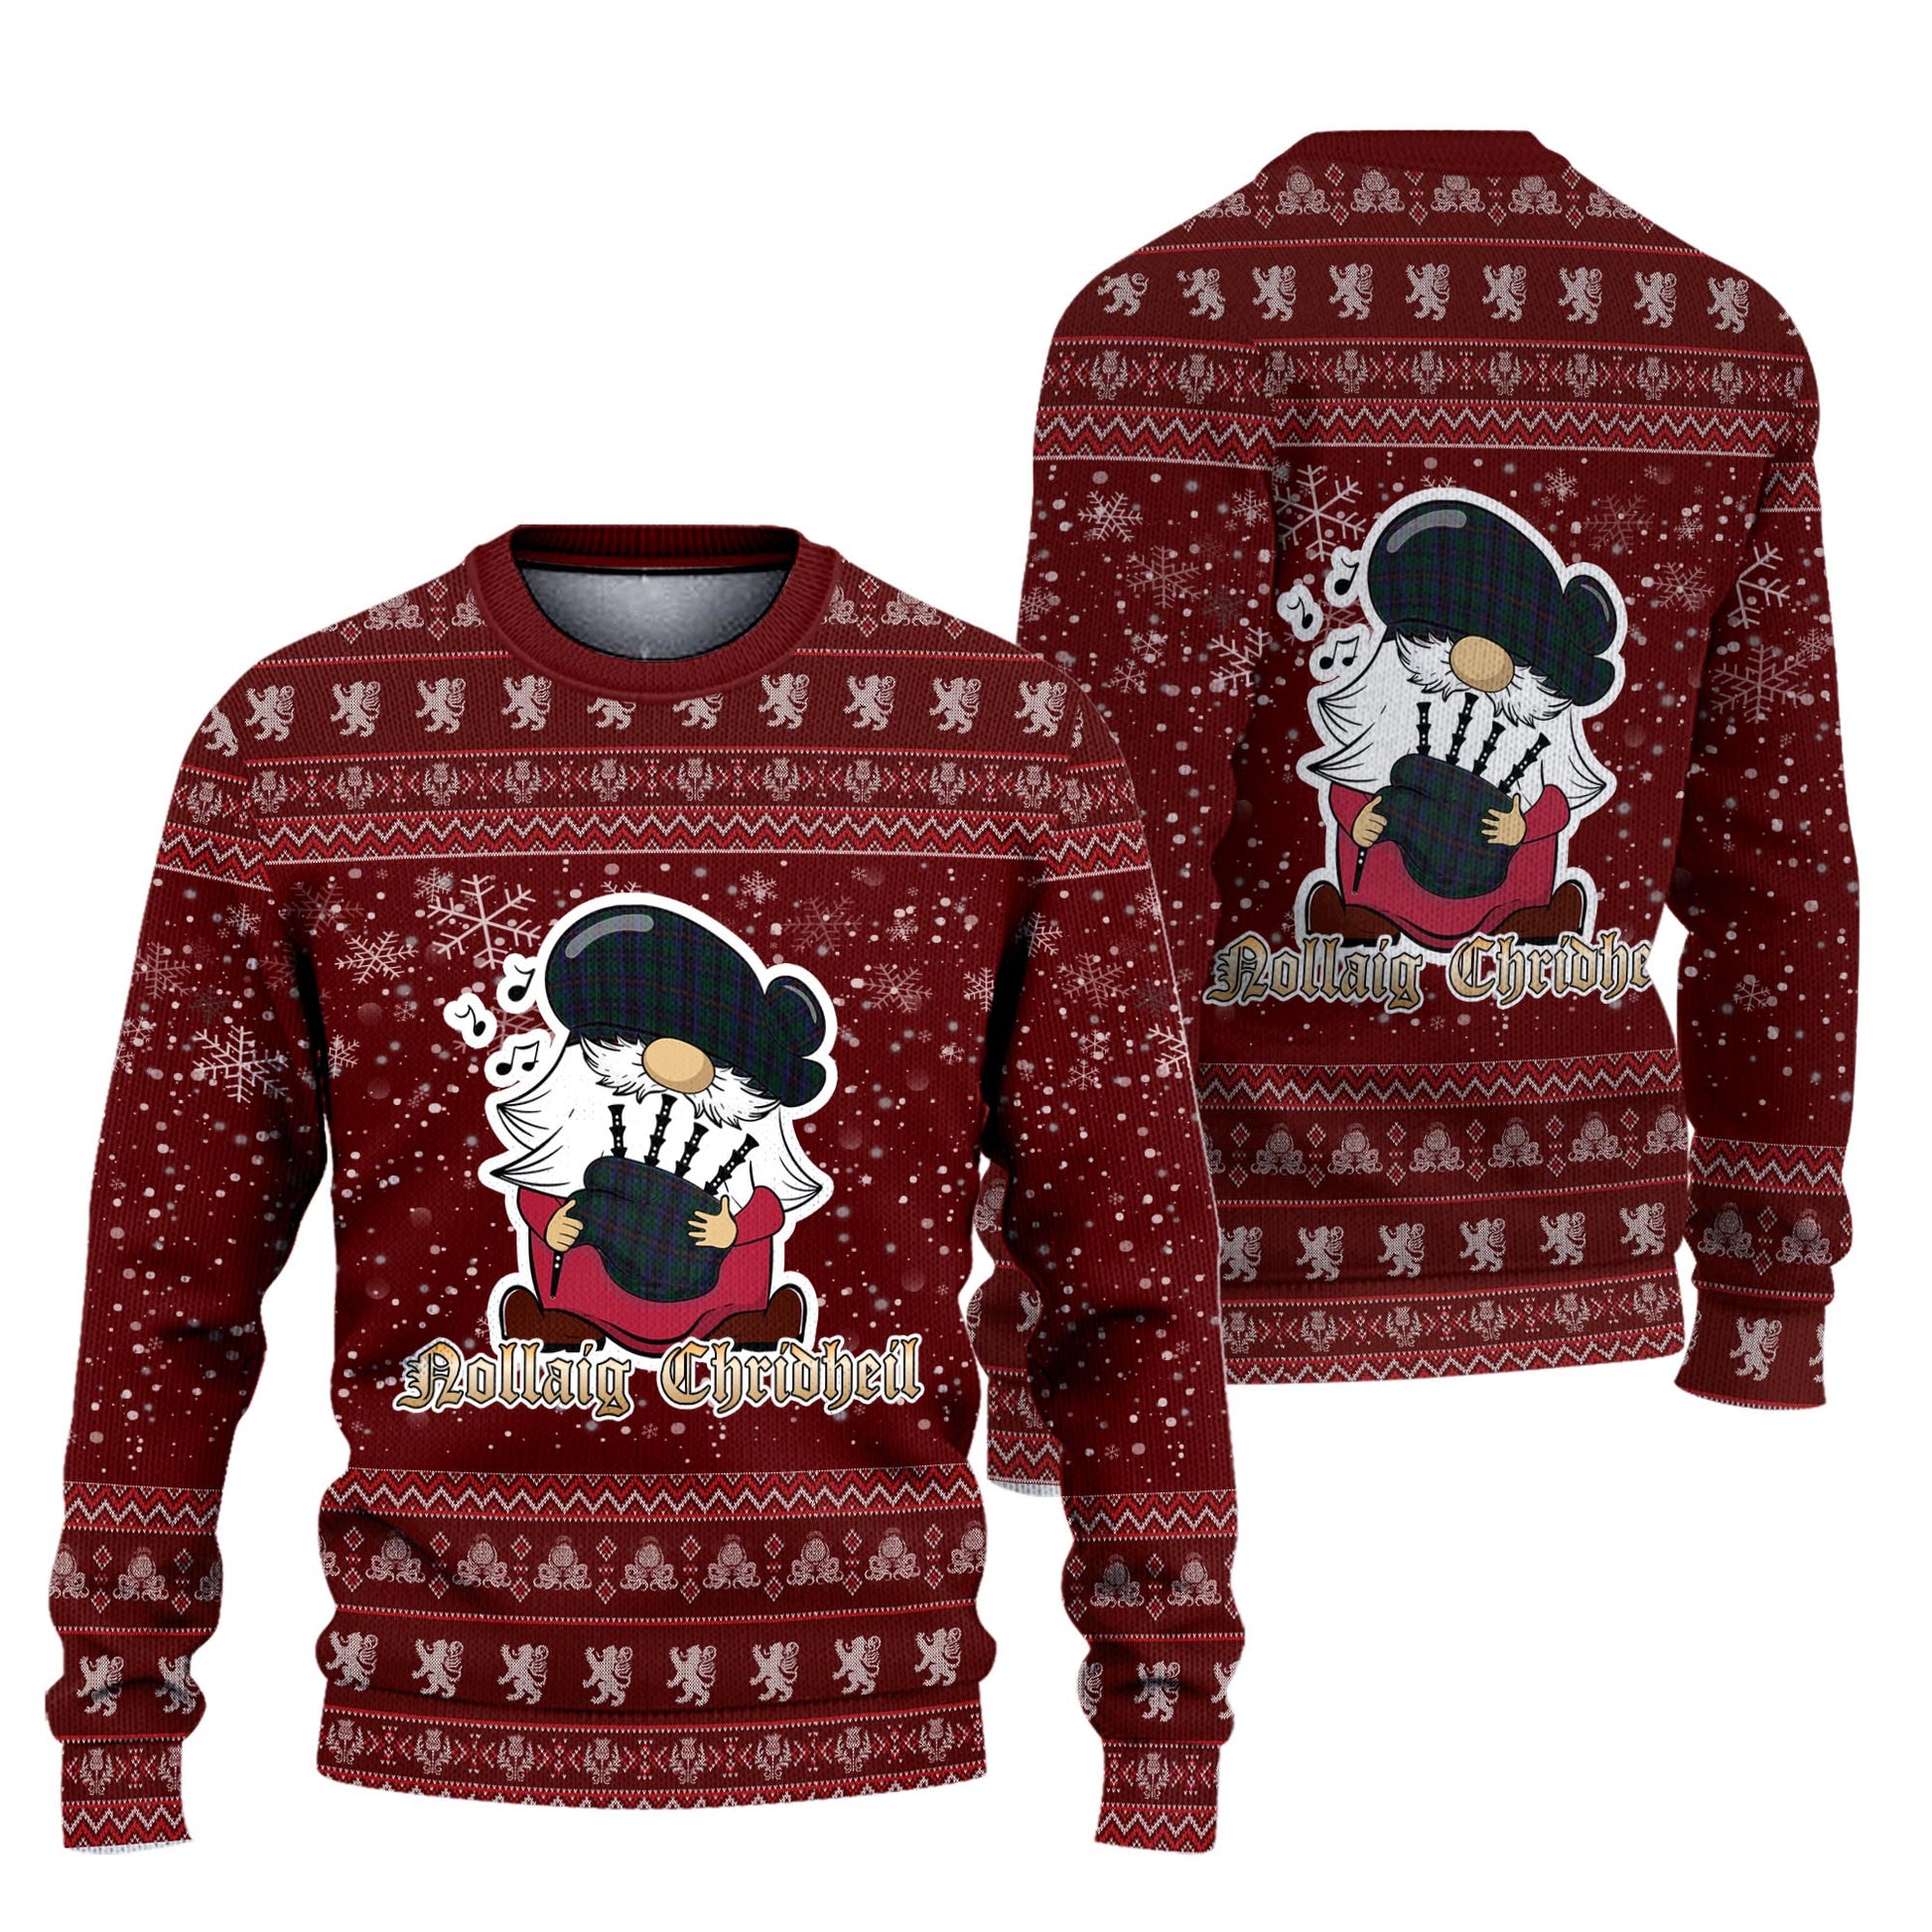 Phillips of Wales Clan Christmas Family Knitted Sweater with Funny Gnome Playing Bagpipes Unisex Red - Tartanvibesclothing